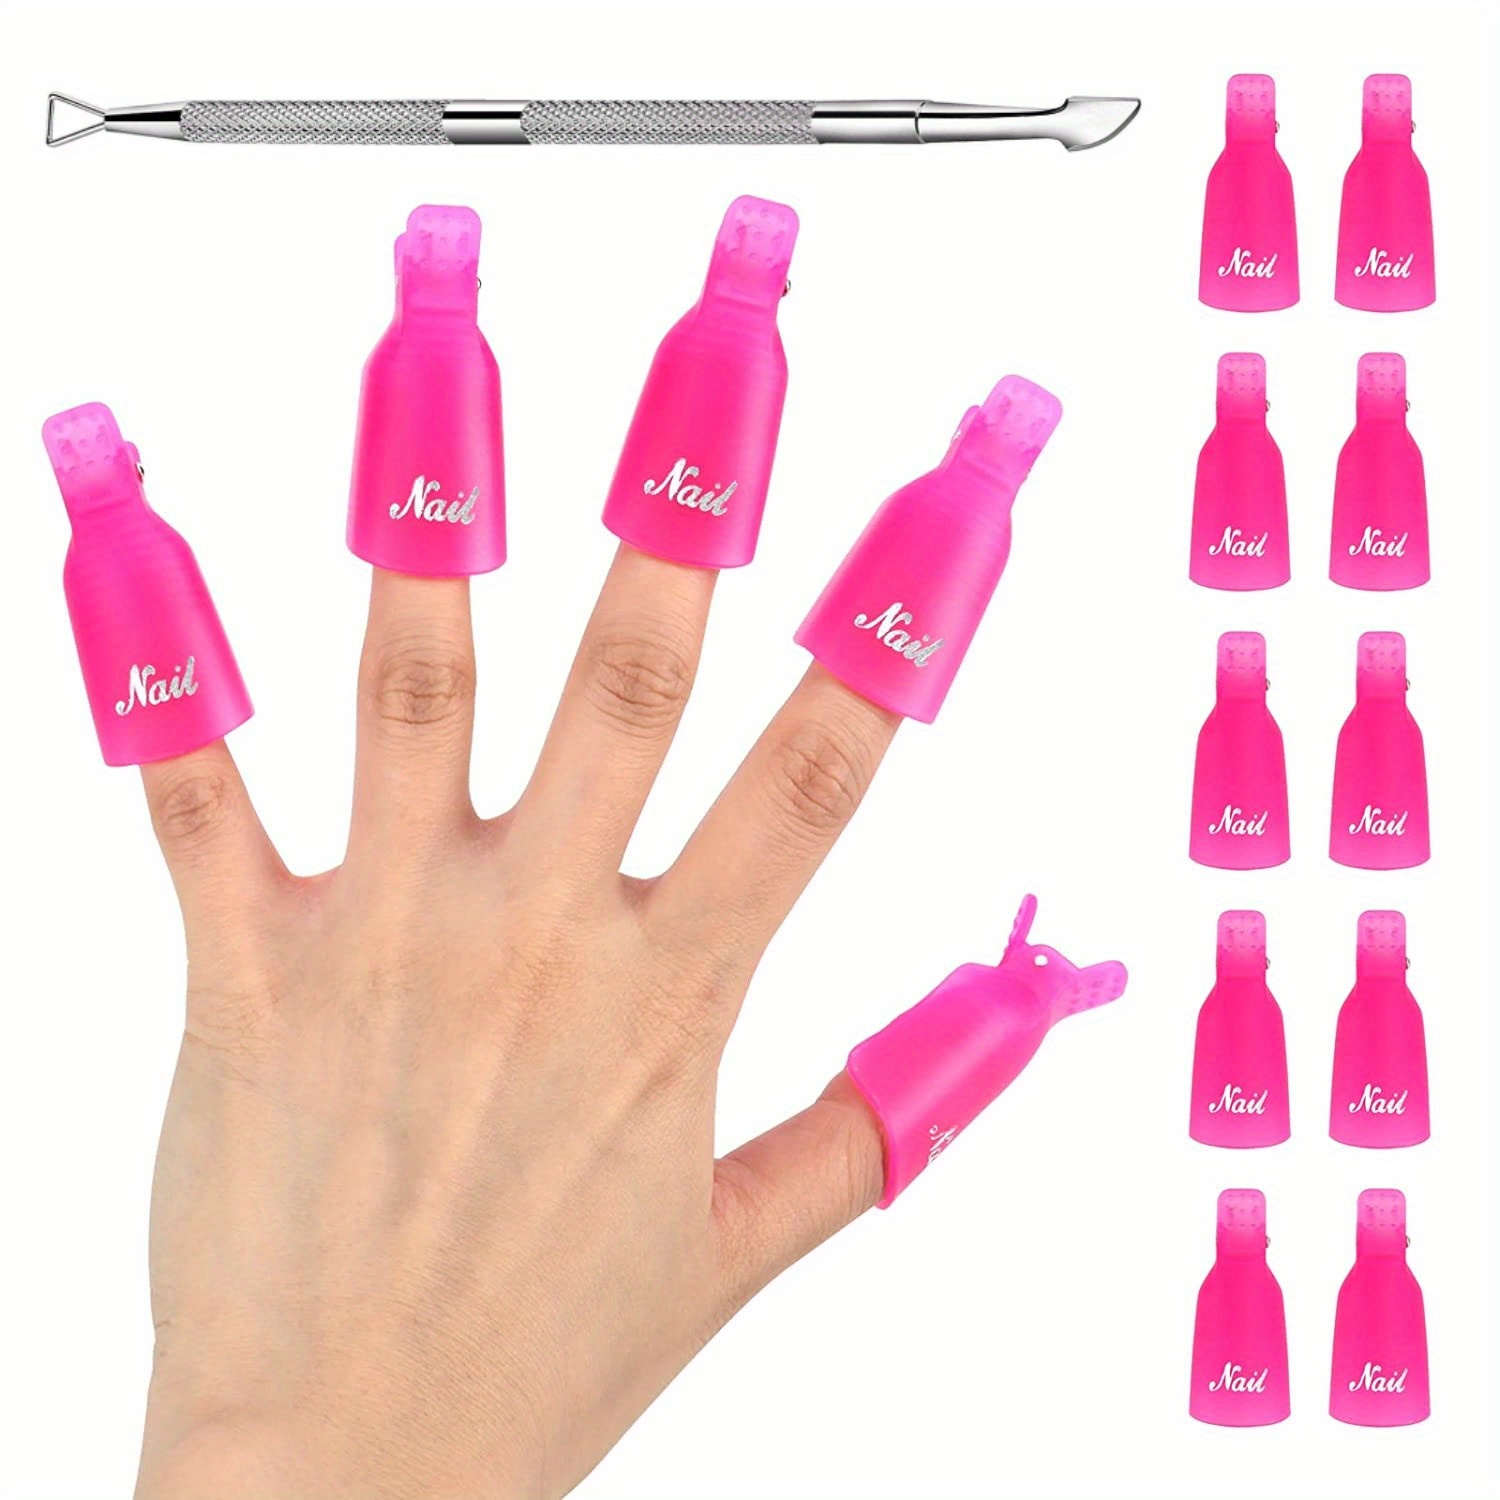 Gel Polish Remover Kit 10 Pieces Nail Polish Remover Clips for Polygel or Dip Nail with Lint Free Nail Wipes Nail Files and Buffer Block Stainless